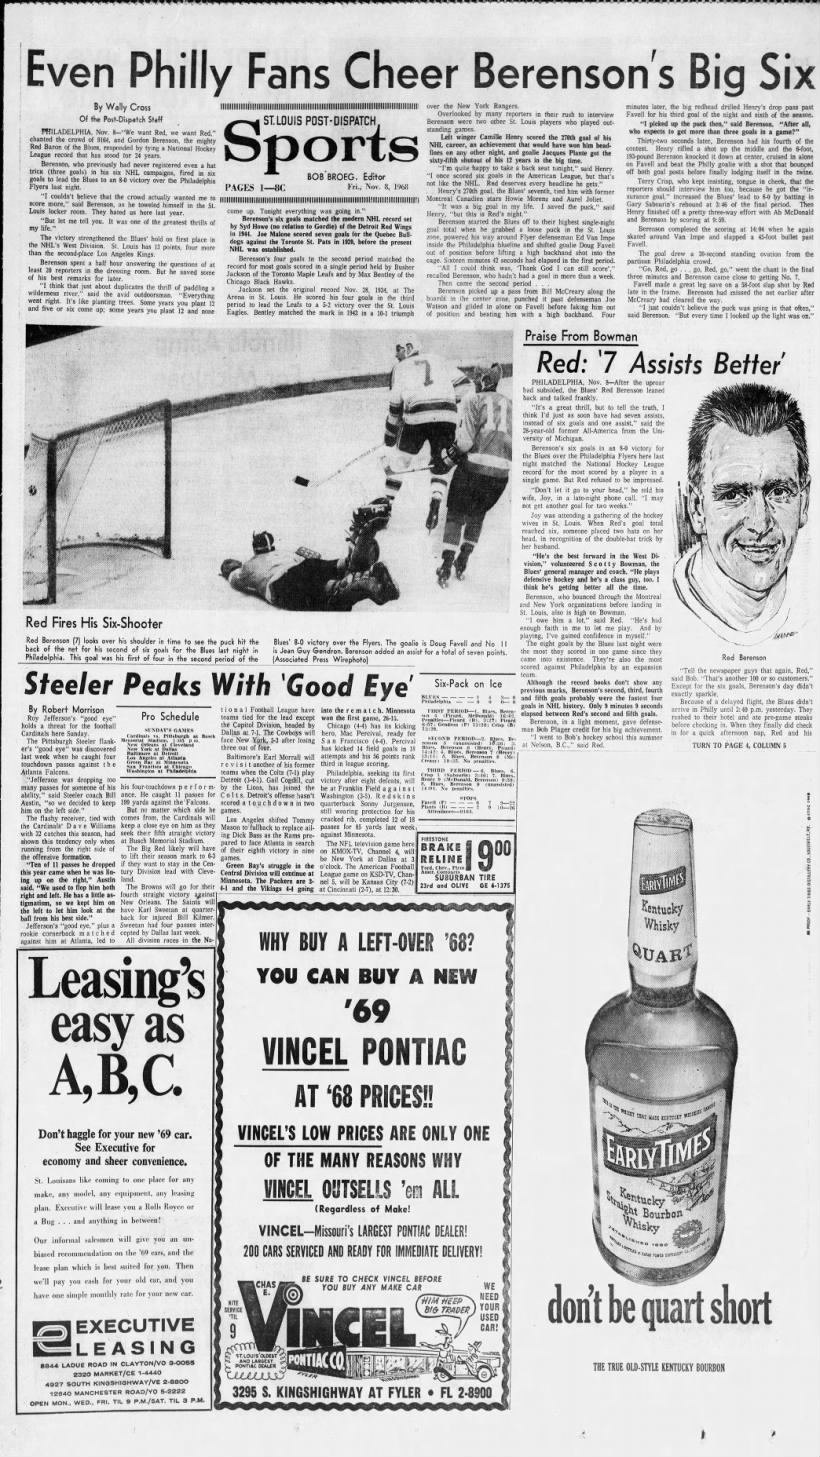 Nov. 7, 1968: Red Berenson scores 6 goals in a game